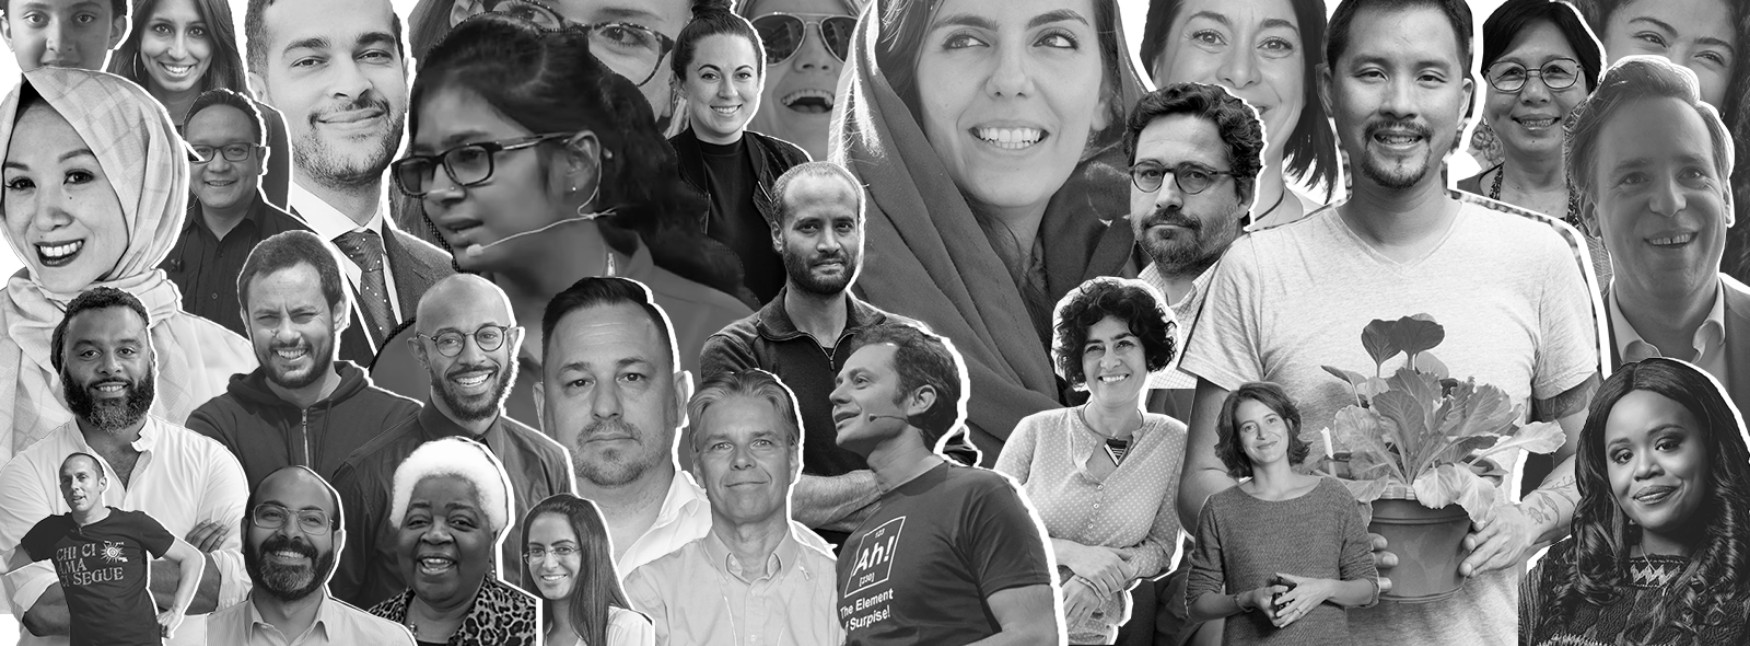 Black-and-white image representing the diversity of the Ashoka Fellows and changemakers through a collage of portraits.